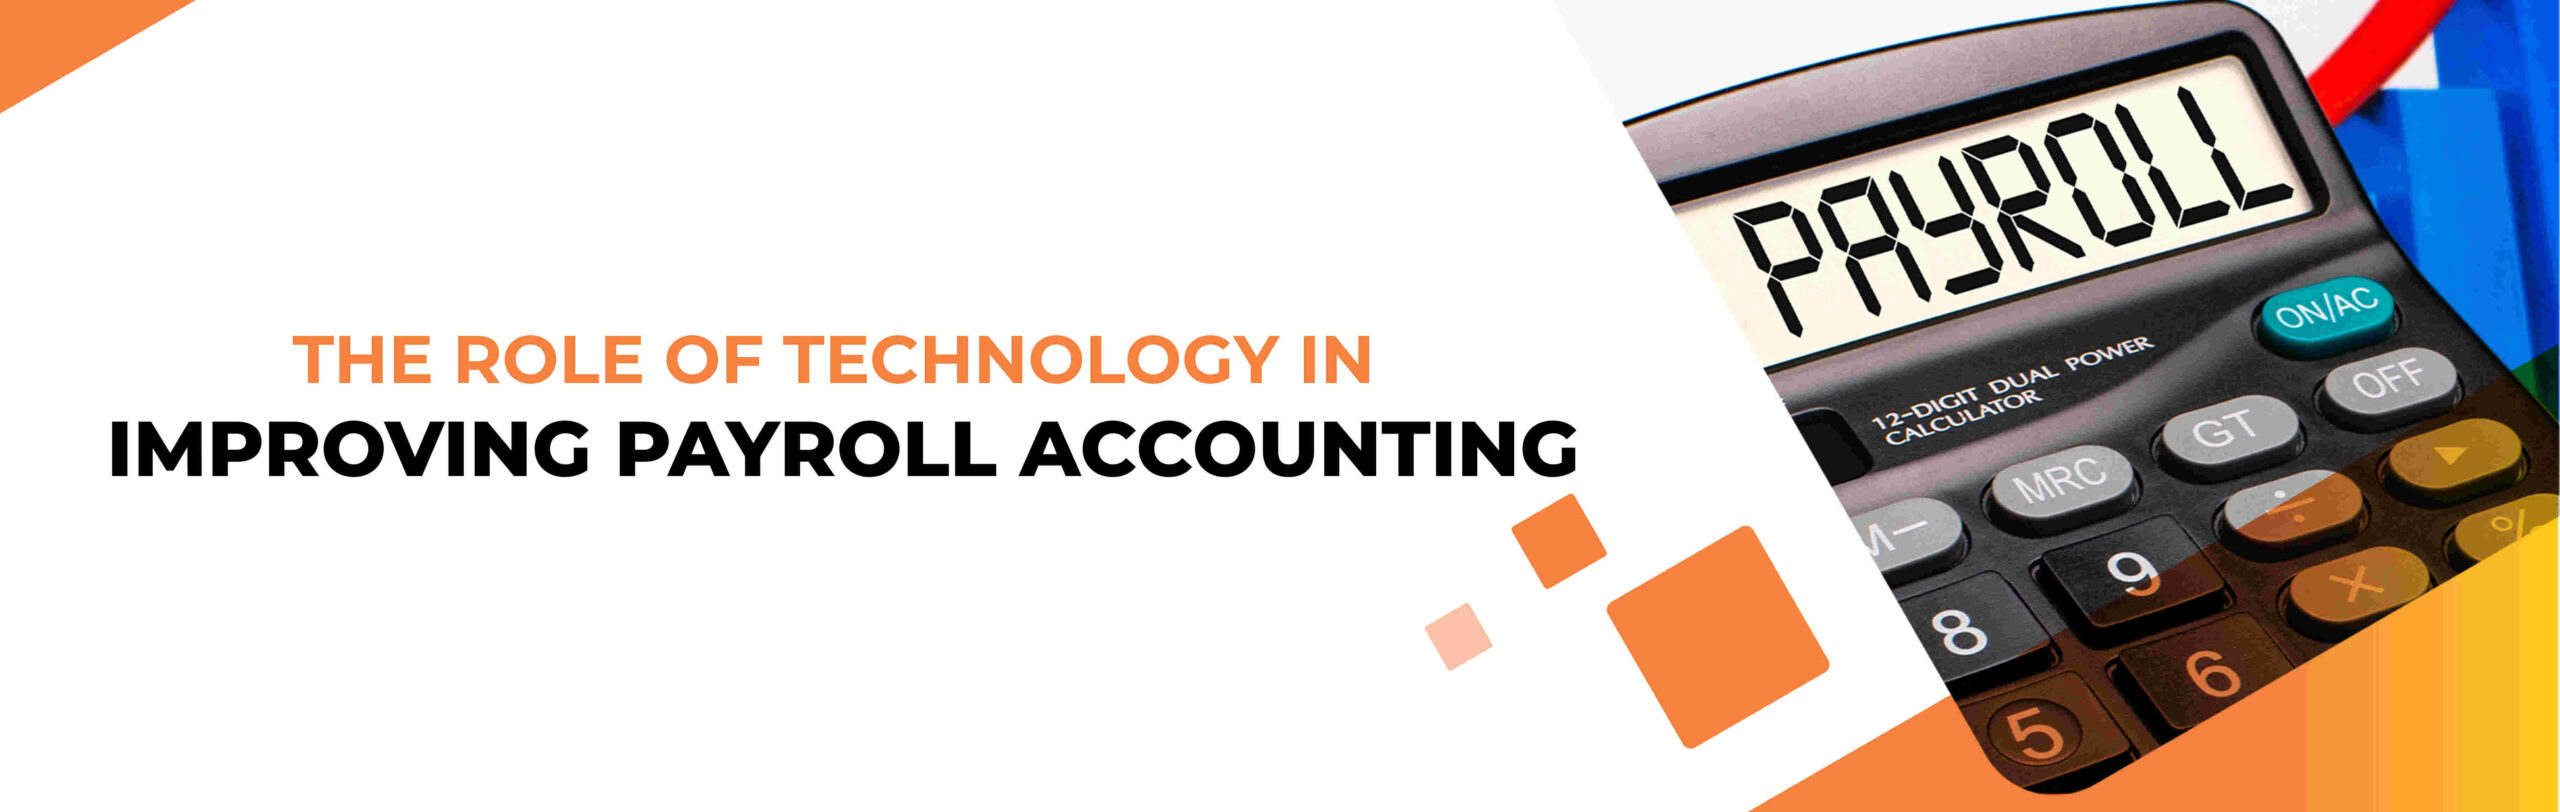 The Role of Technology in Improving Payroll Accounting